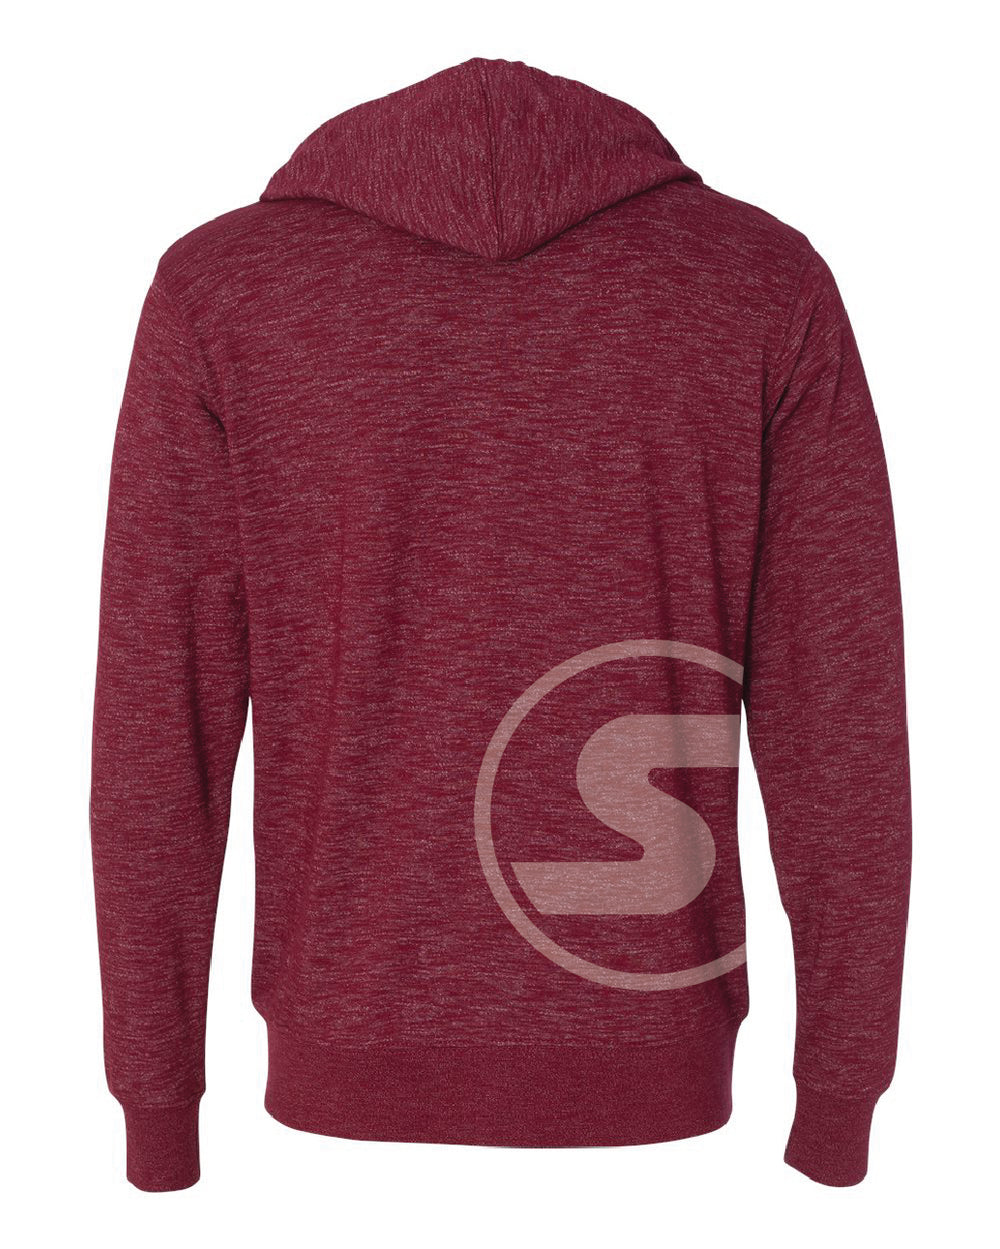 Men's South Of The Border Zip-Up Hoodie in Rojo Cardenal